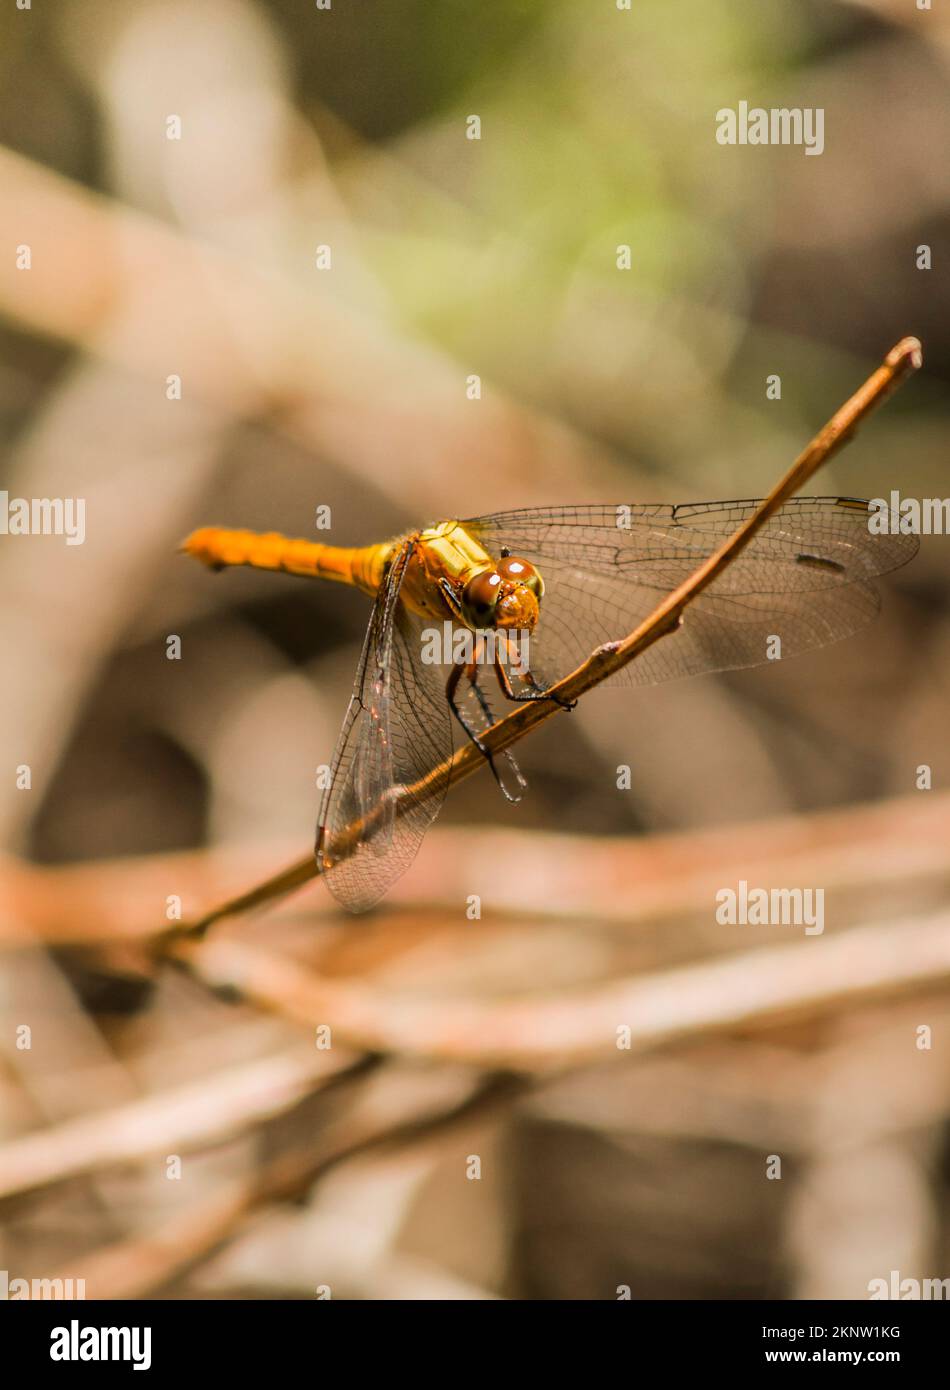 Insect photograph on a dragonfly clutching wooded vegetation. Taken: Brown Lake, North Stradbroke Island, Queensland, Australia Stock Photo